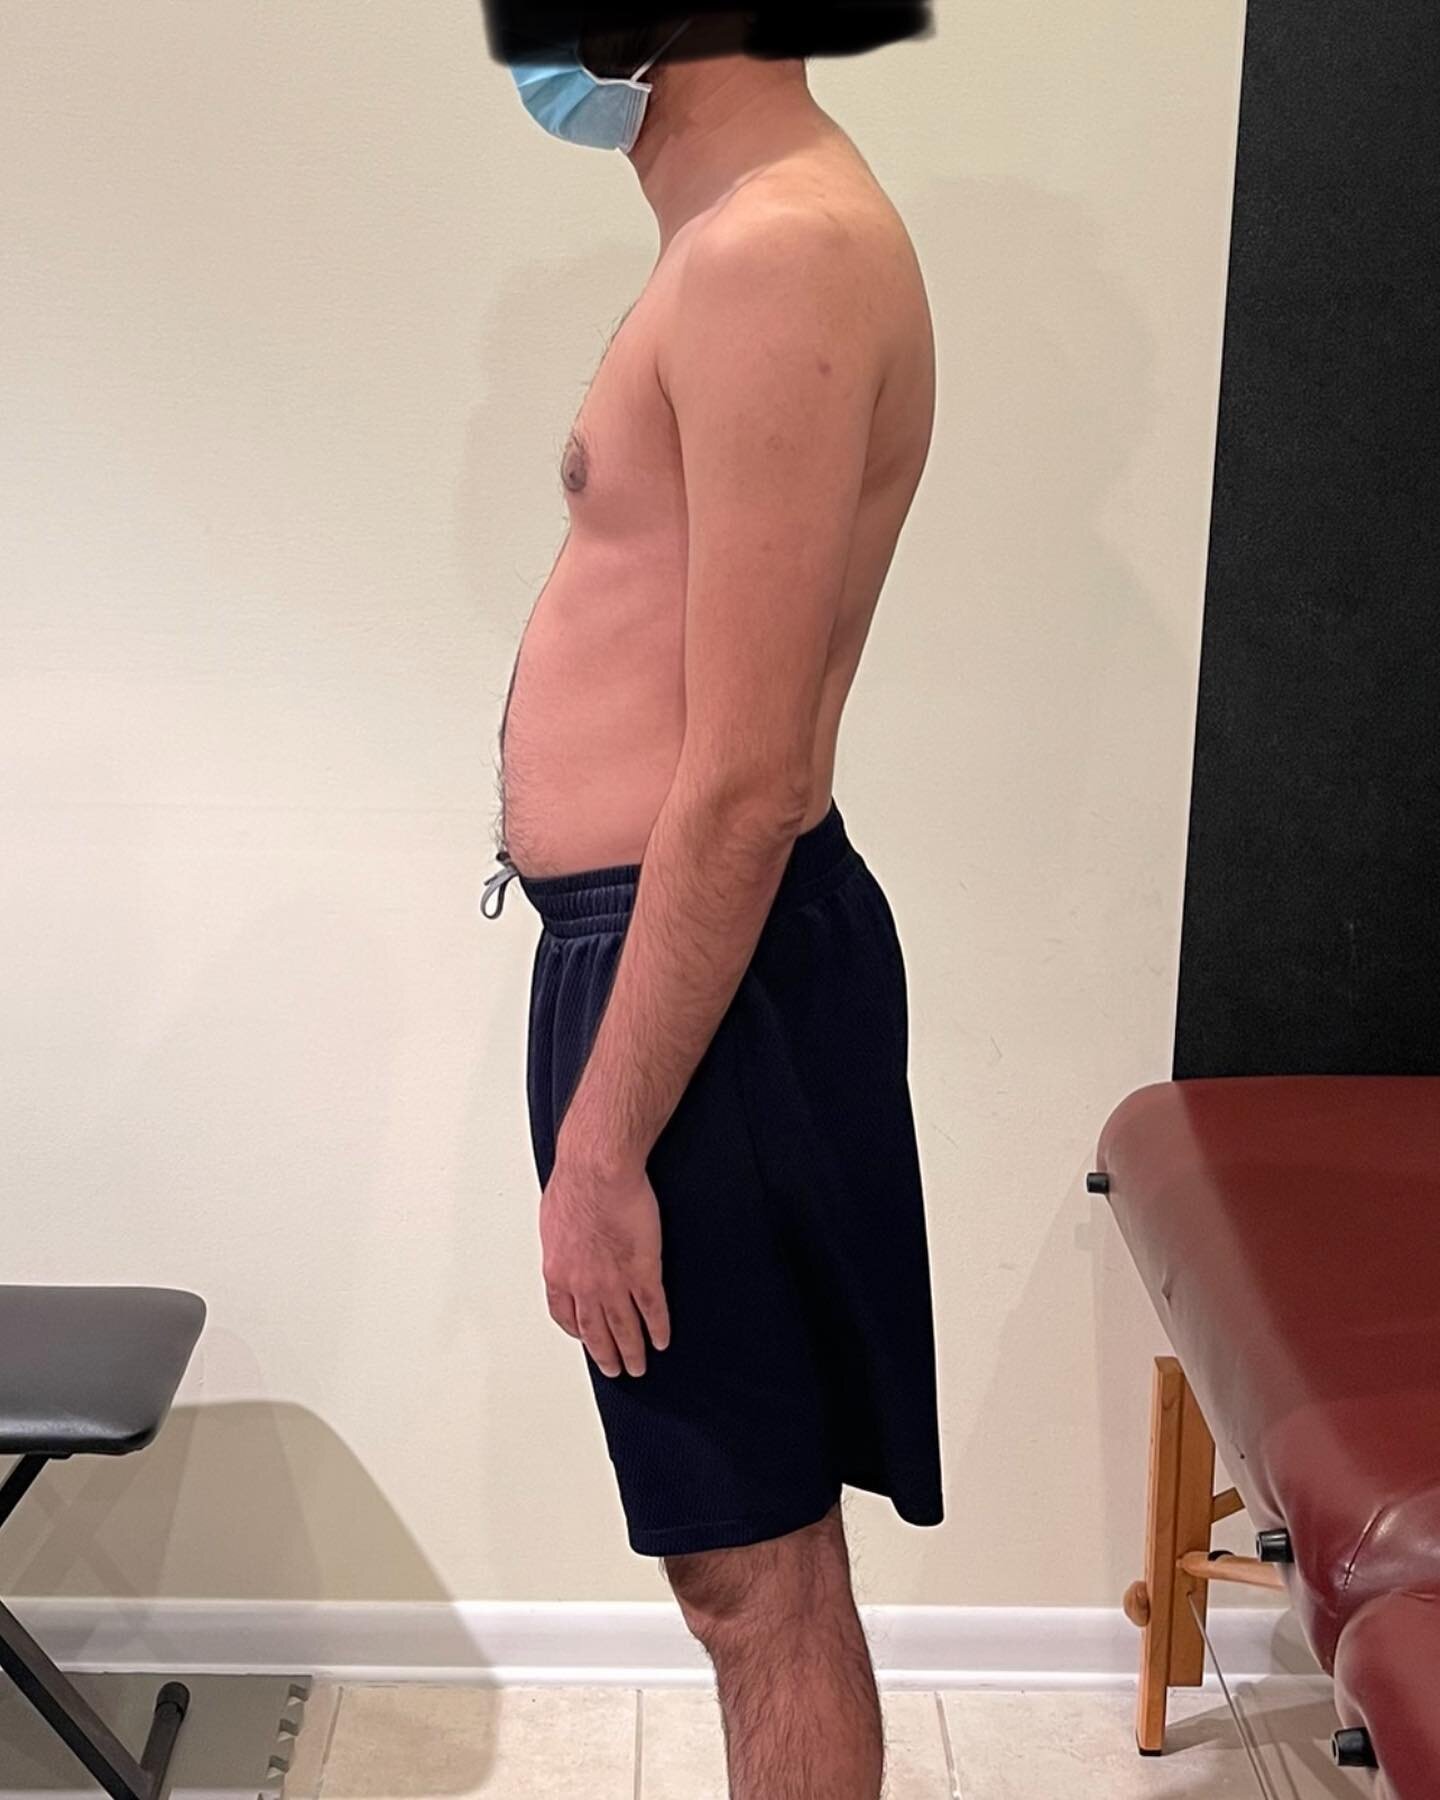 How drastically can your posture change with physical therapy? This took only 3 months of postural training and breath work to reposition his diaphragm and pelvic floor. Instead of breathing in through only his stomach, he is now able to expand his e